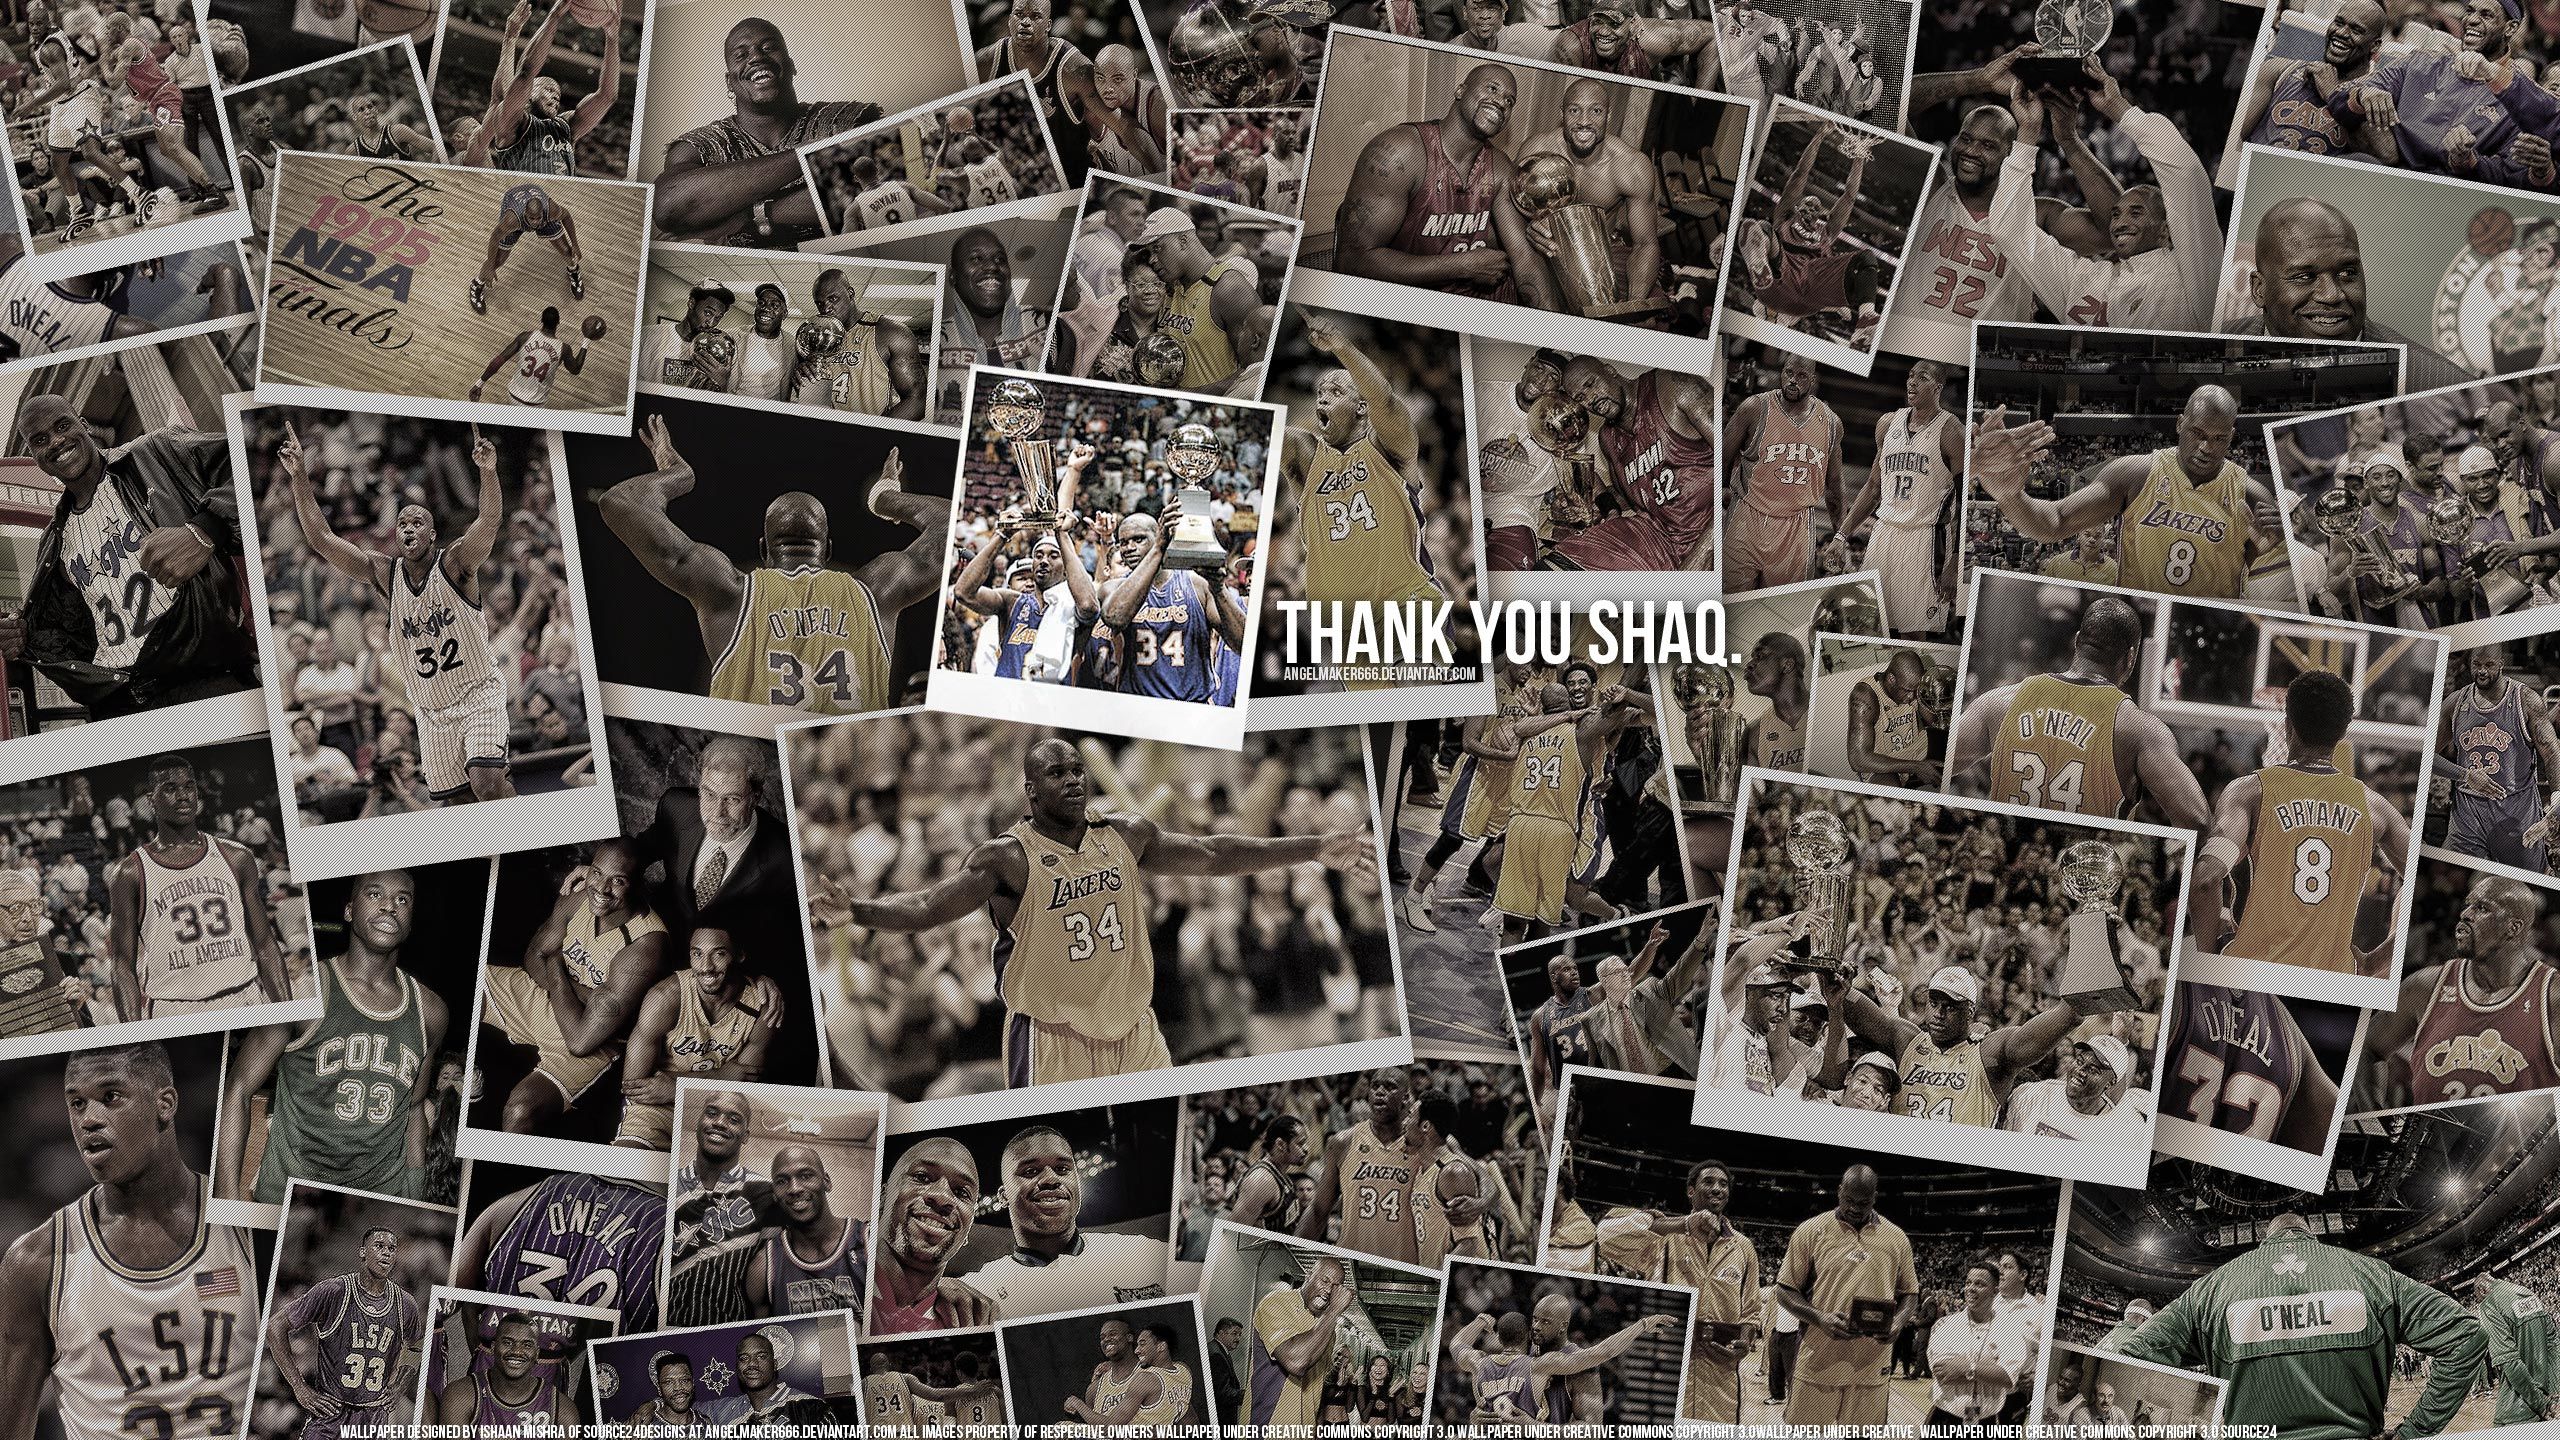 Shaquille O'Neal Career Picture Widescreen Wallpaper. Basketball